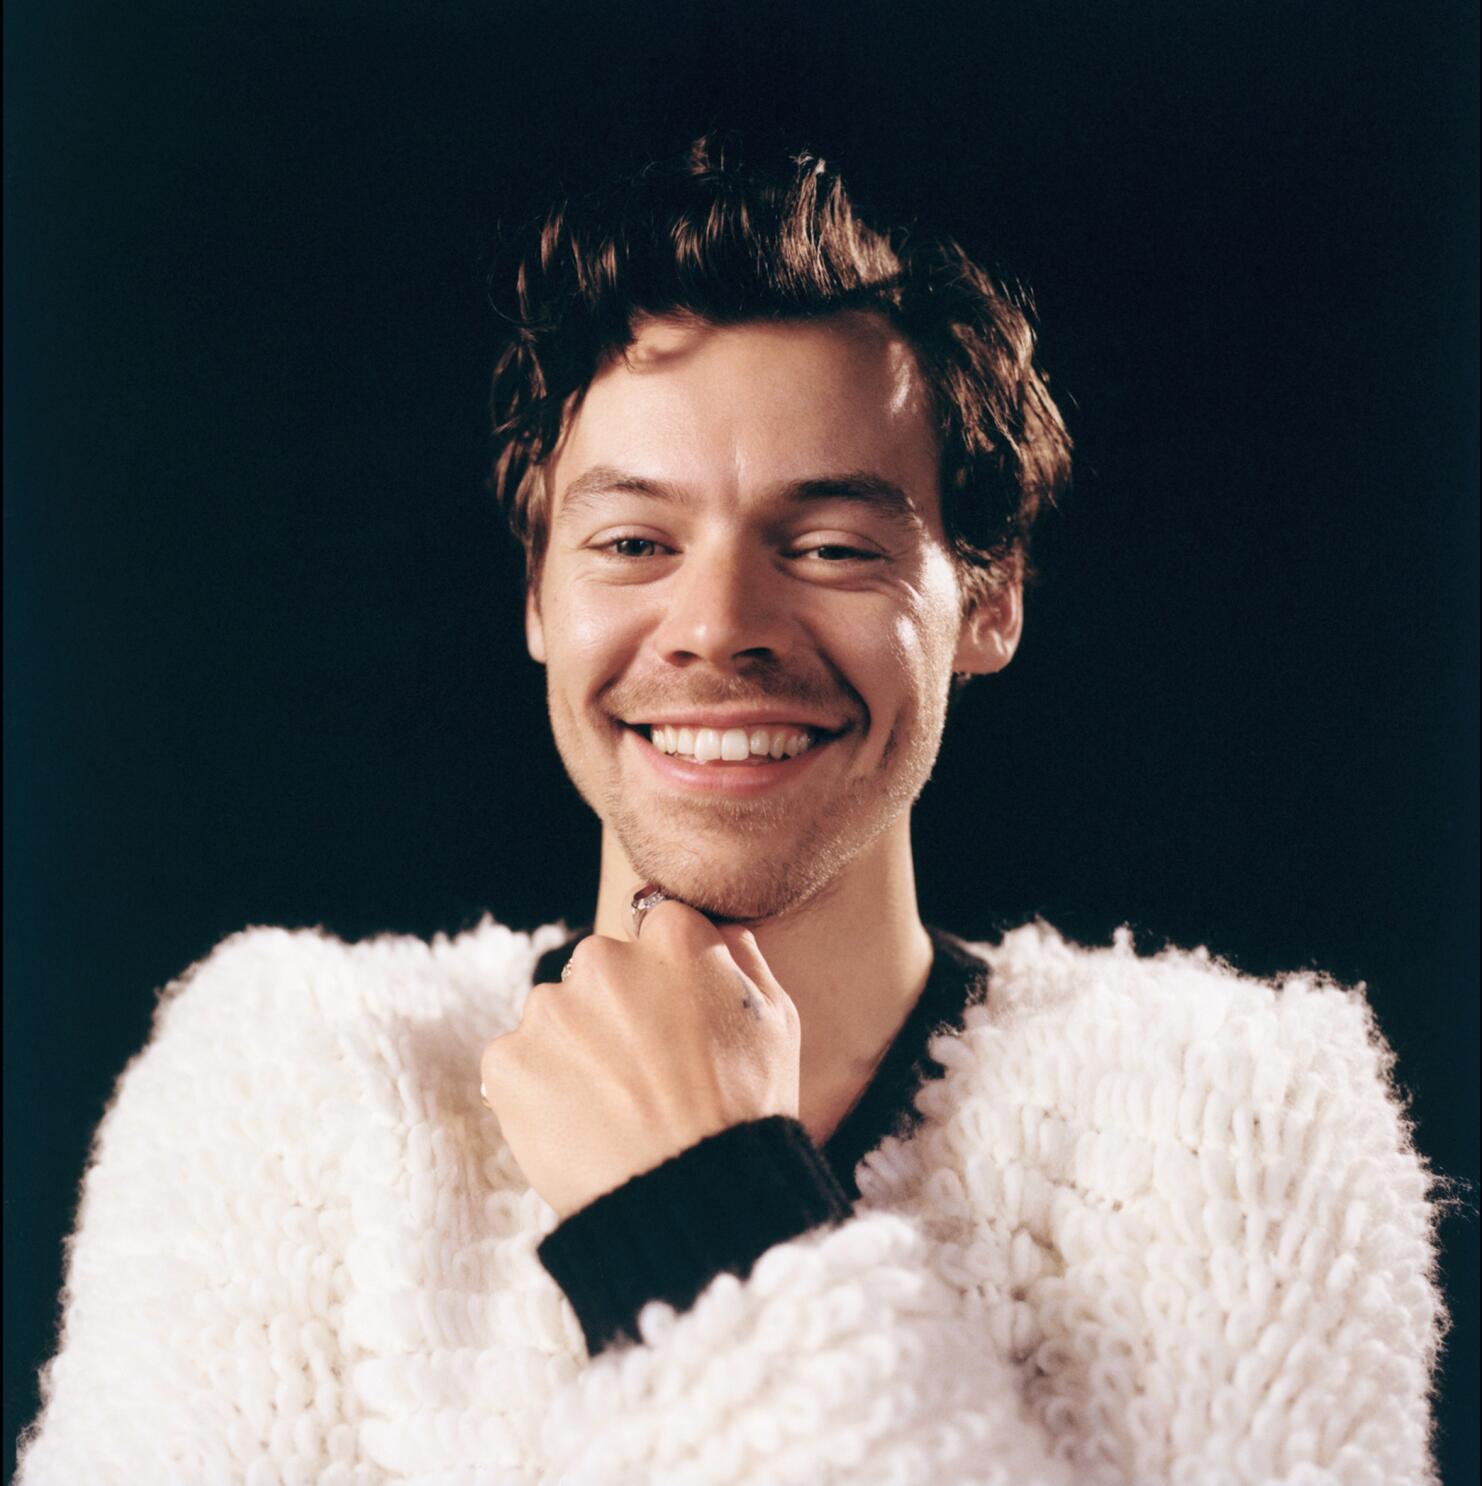 Harry Styles opens up about his sexuality and addresses